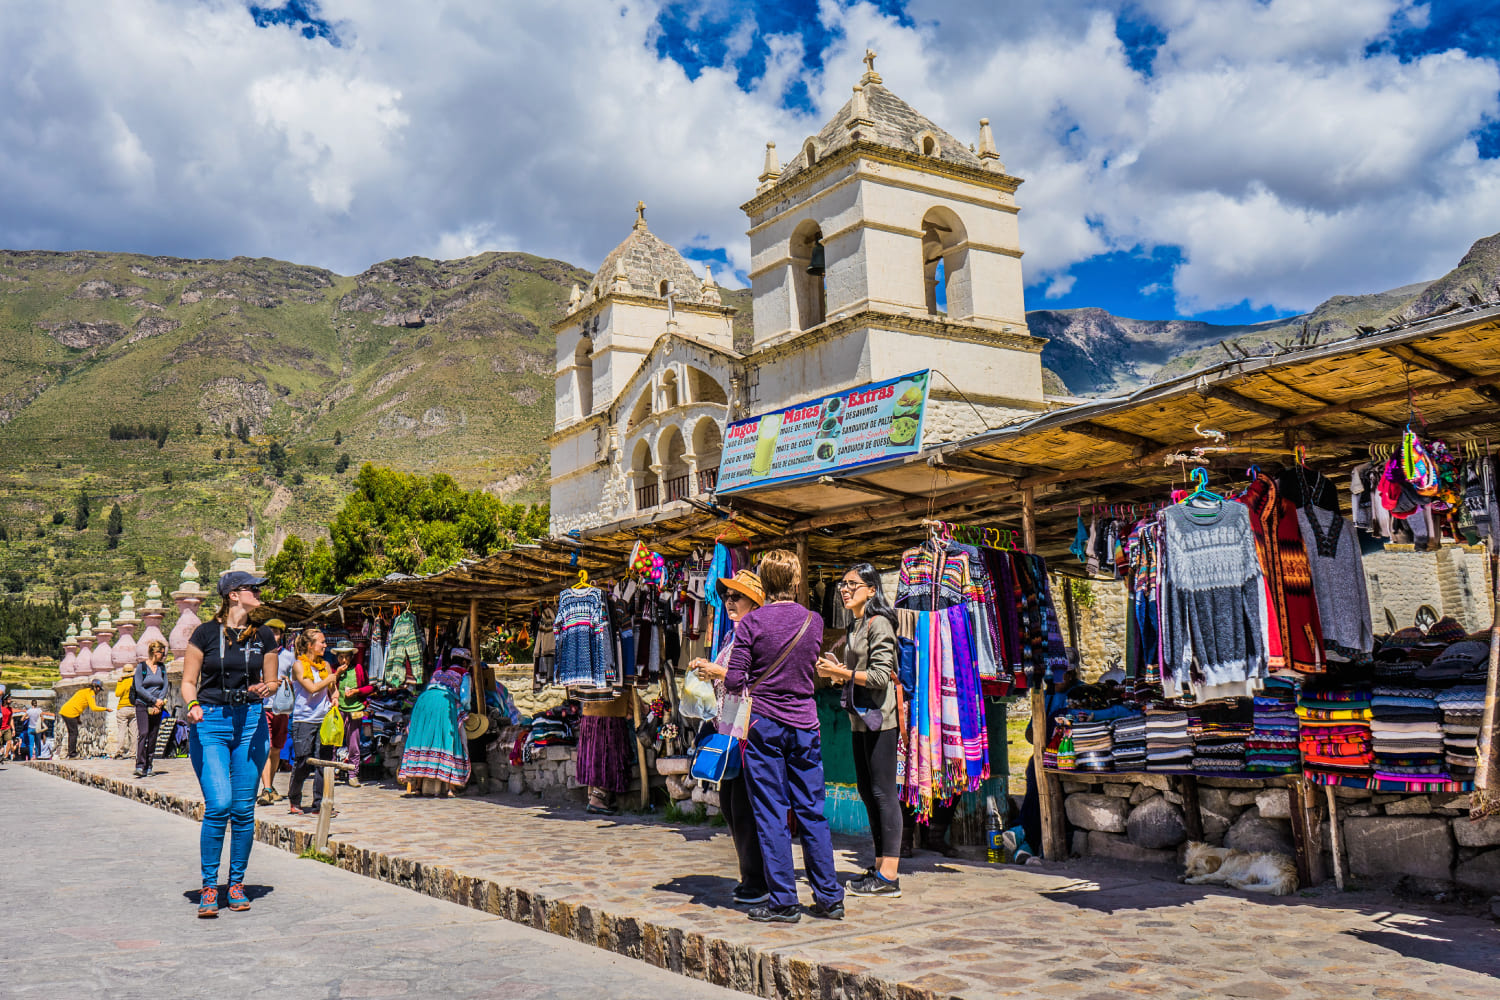 THE VILLAGES OF THE COLCA DU CANYON